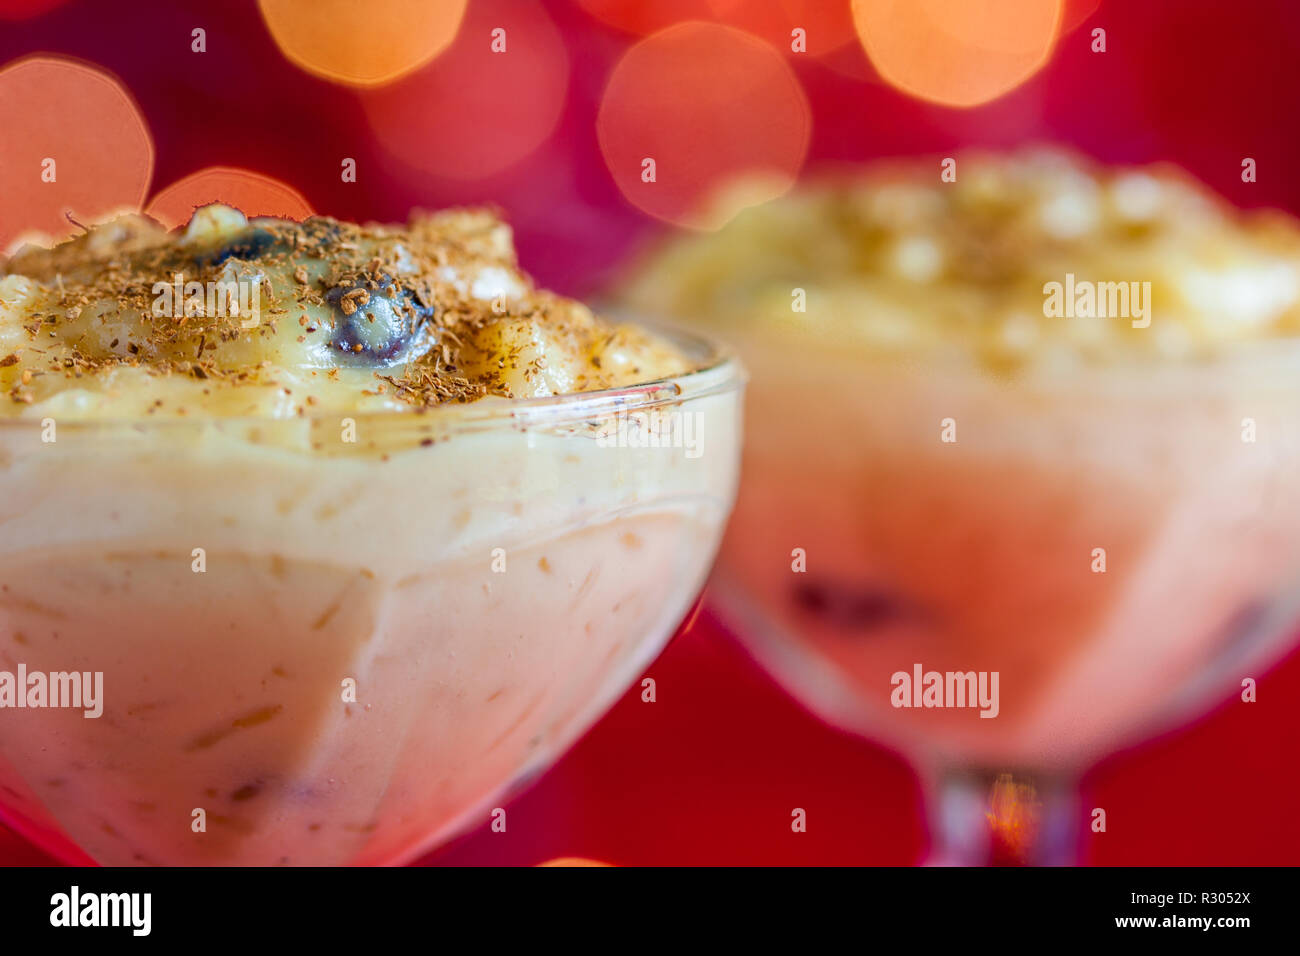 Traditional Colombian dessert made of rice and milk called arroz de leche on a christmas red background Stock Photo